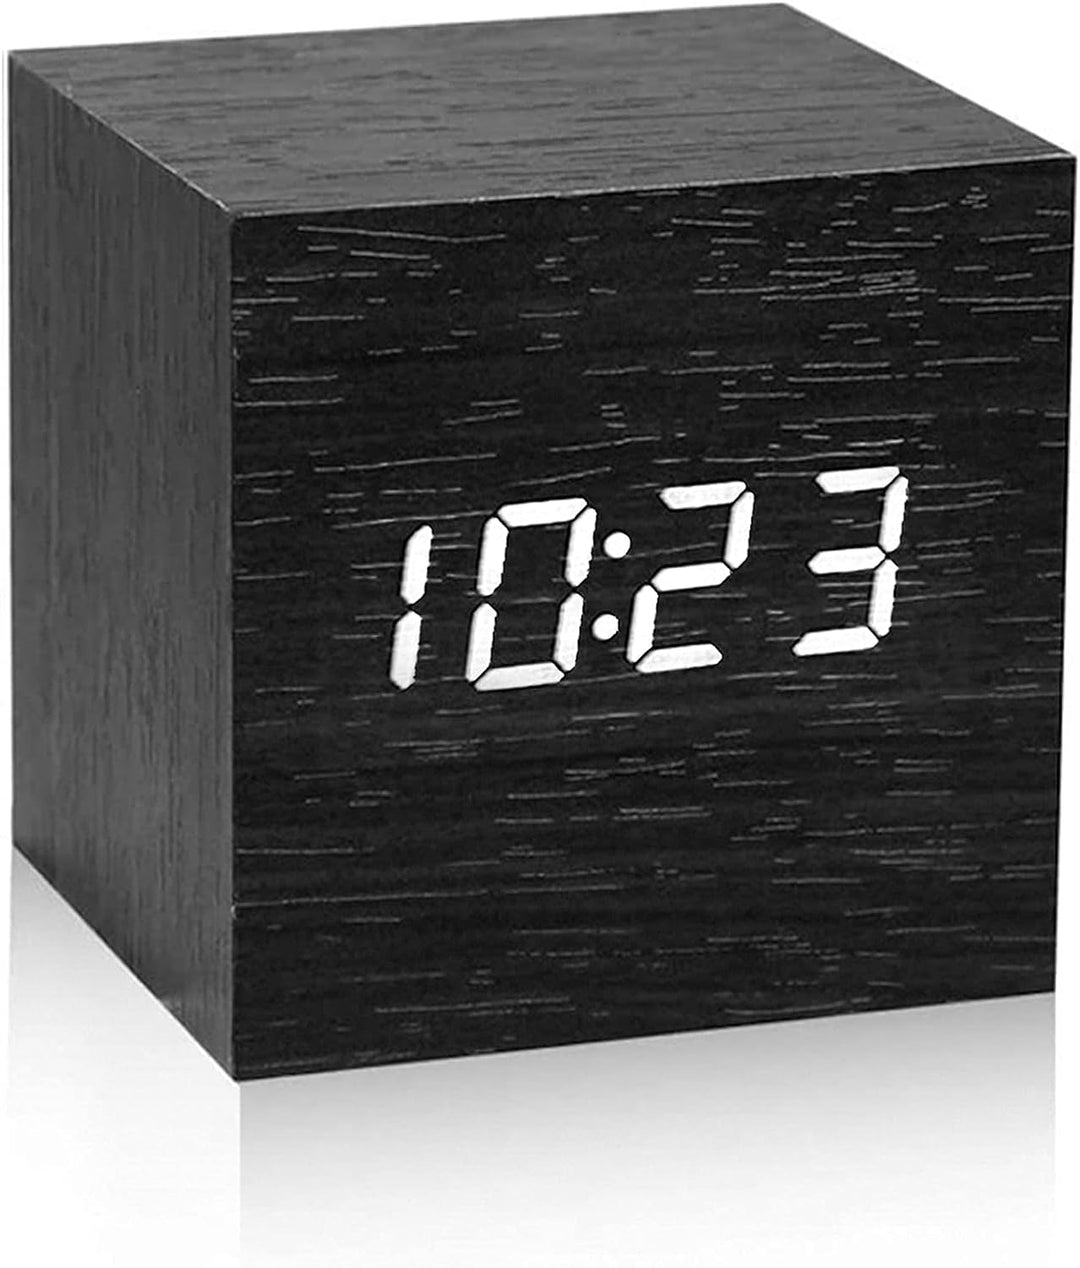 Digital Alarm Clock for Bedrooms/Bedside/Desk/Kids/Dormitory/Home/Travel, Wood LED Light Small Cube Clocks Displays Time Date Temperature Powered by Usb(Black)